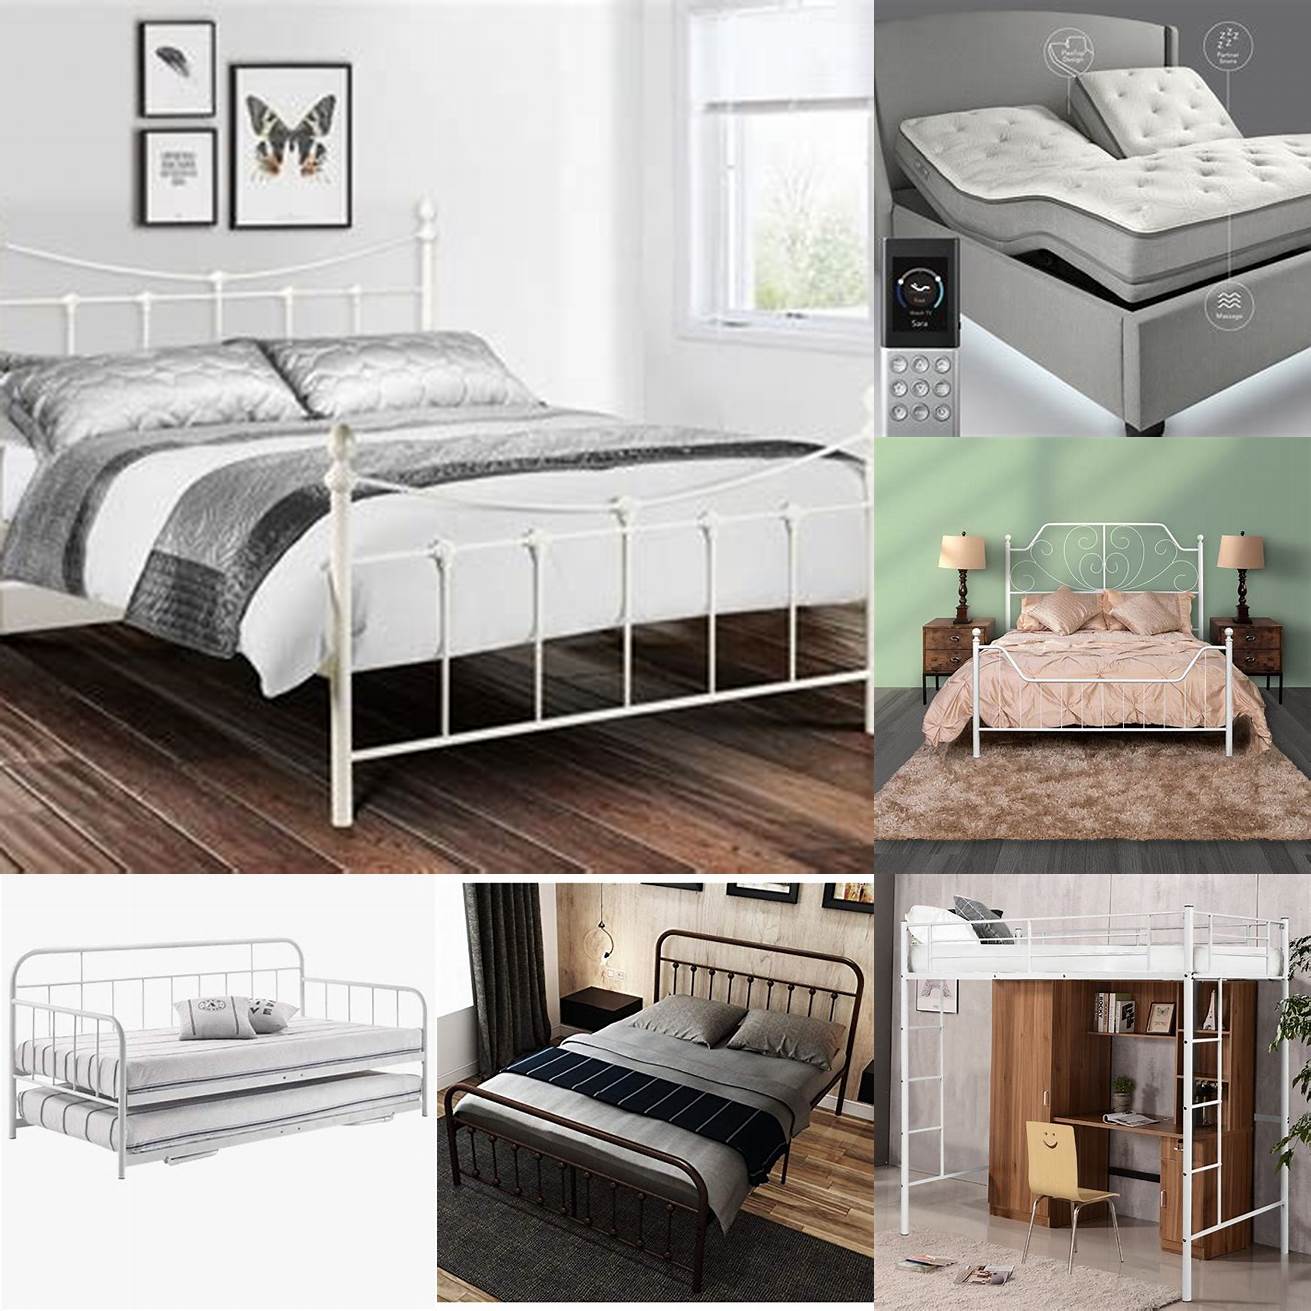 1 Durability - Metal beds are known for their sturdiness and long-lasting quality They are less likely to break warp or chip compared to wooden or upholstered beds